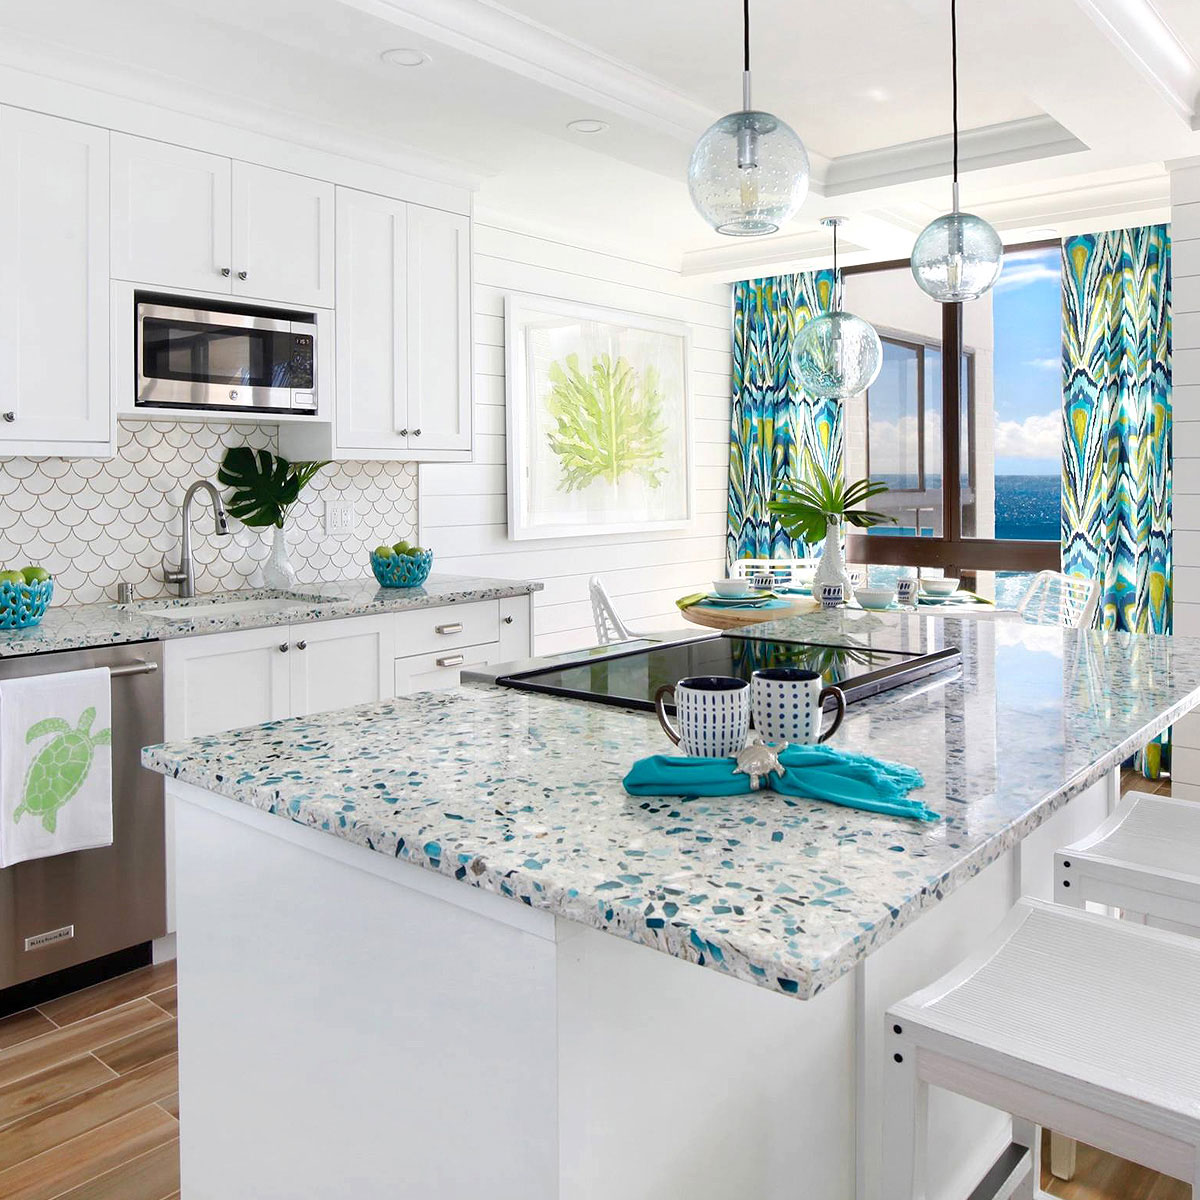 California Recycled Glass Countertops, How To Install Glass Countertops